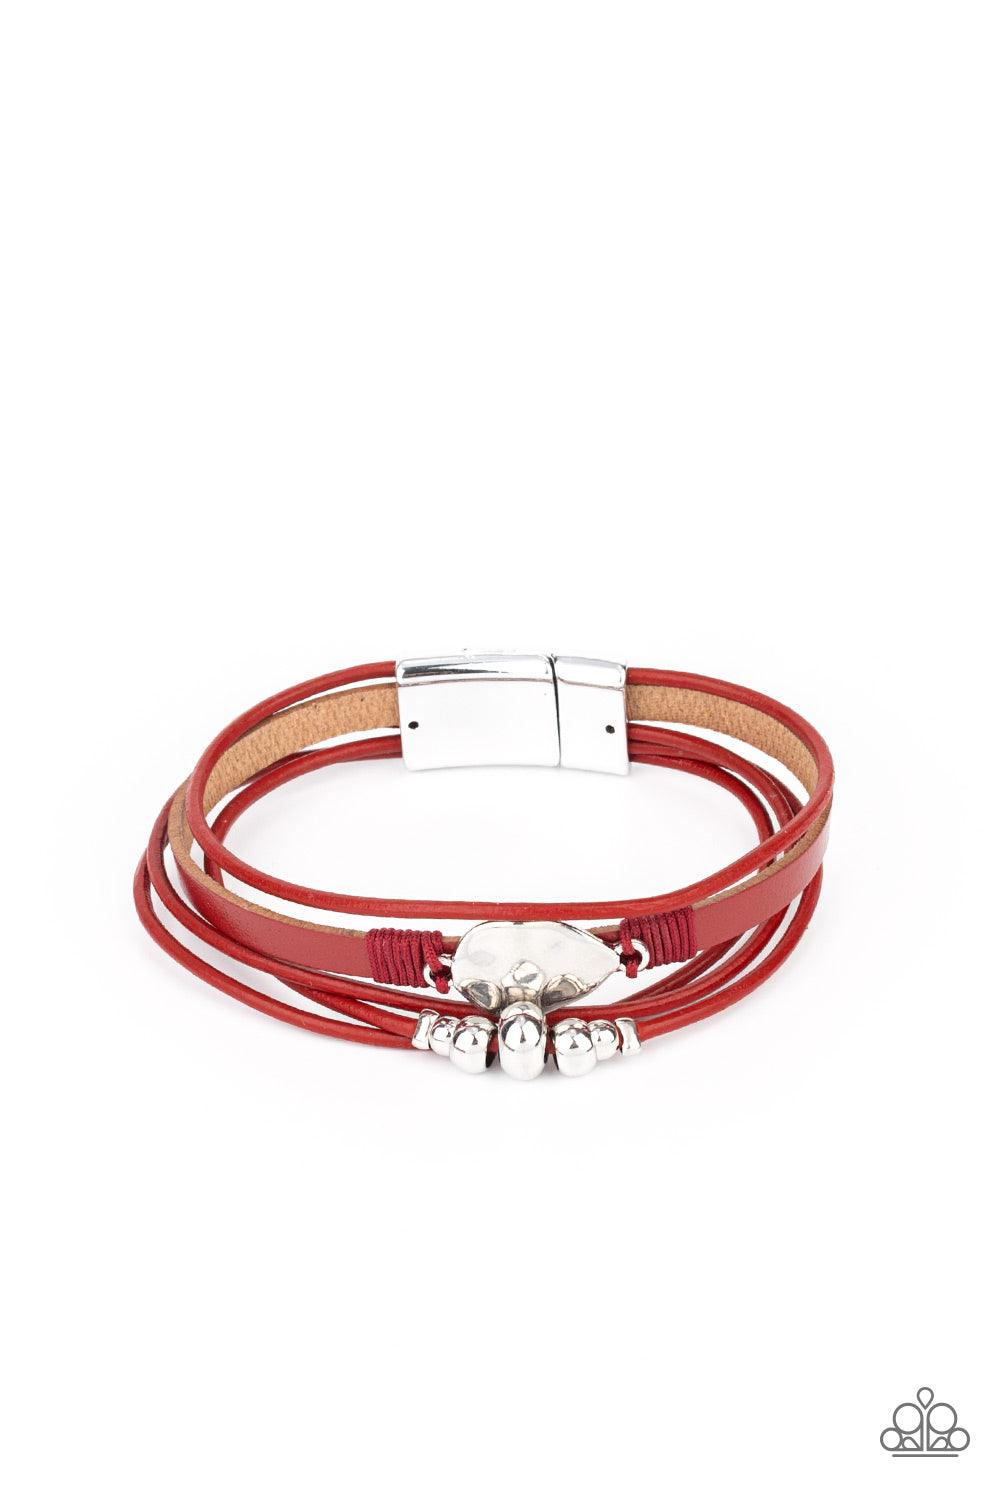 Paparazzi Accessories Tahoe Tourist - Red Infused with a silver beaded accent, rows of shiny red cording join a red leather band around the wrist. A hammered silver teardrop is knotted in place with red thread, adding an artisanal touch to the colorfully